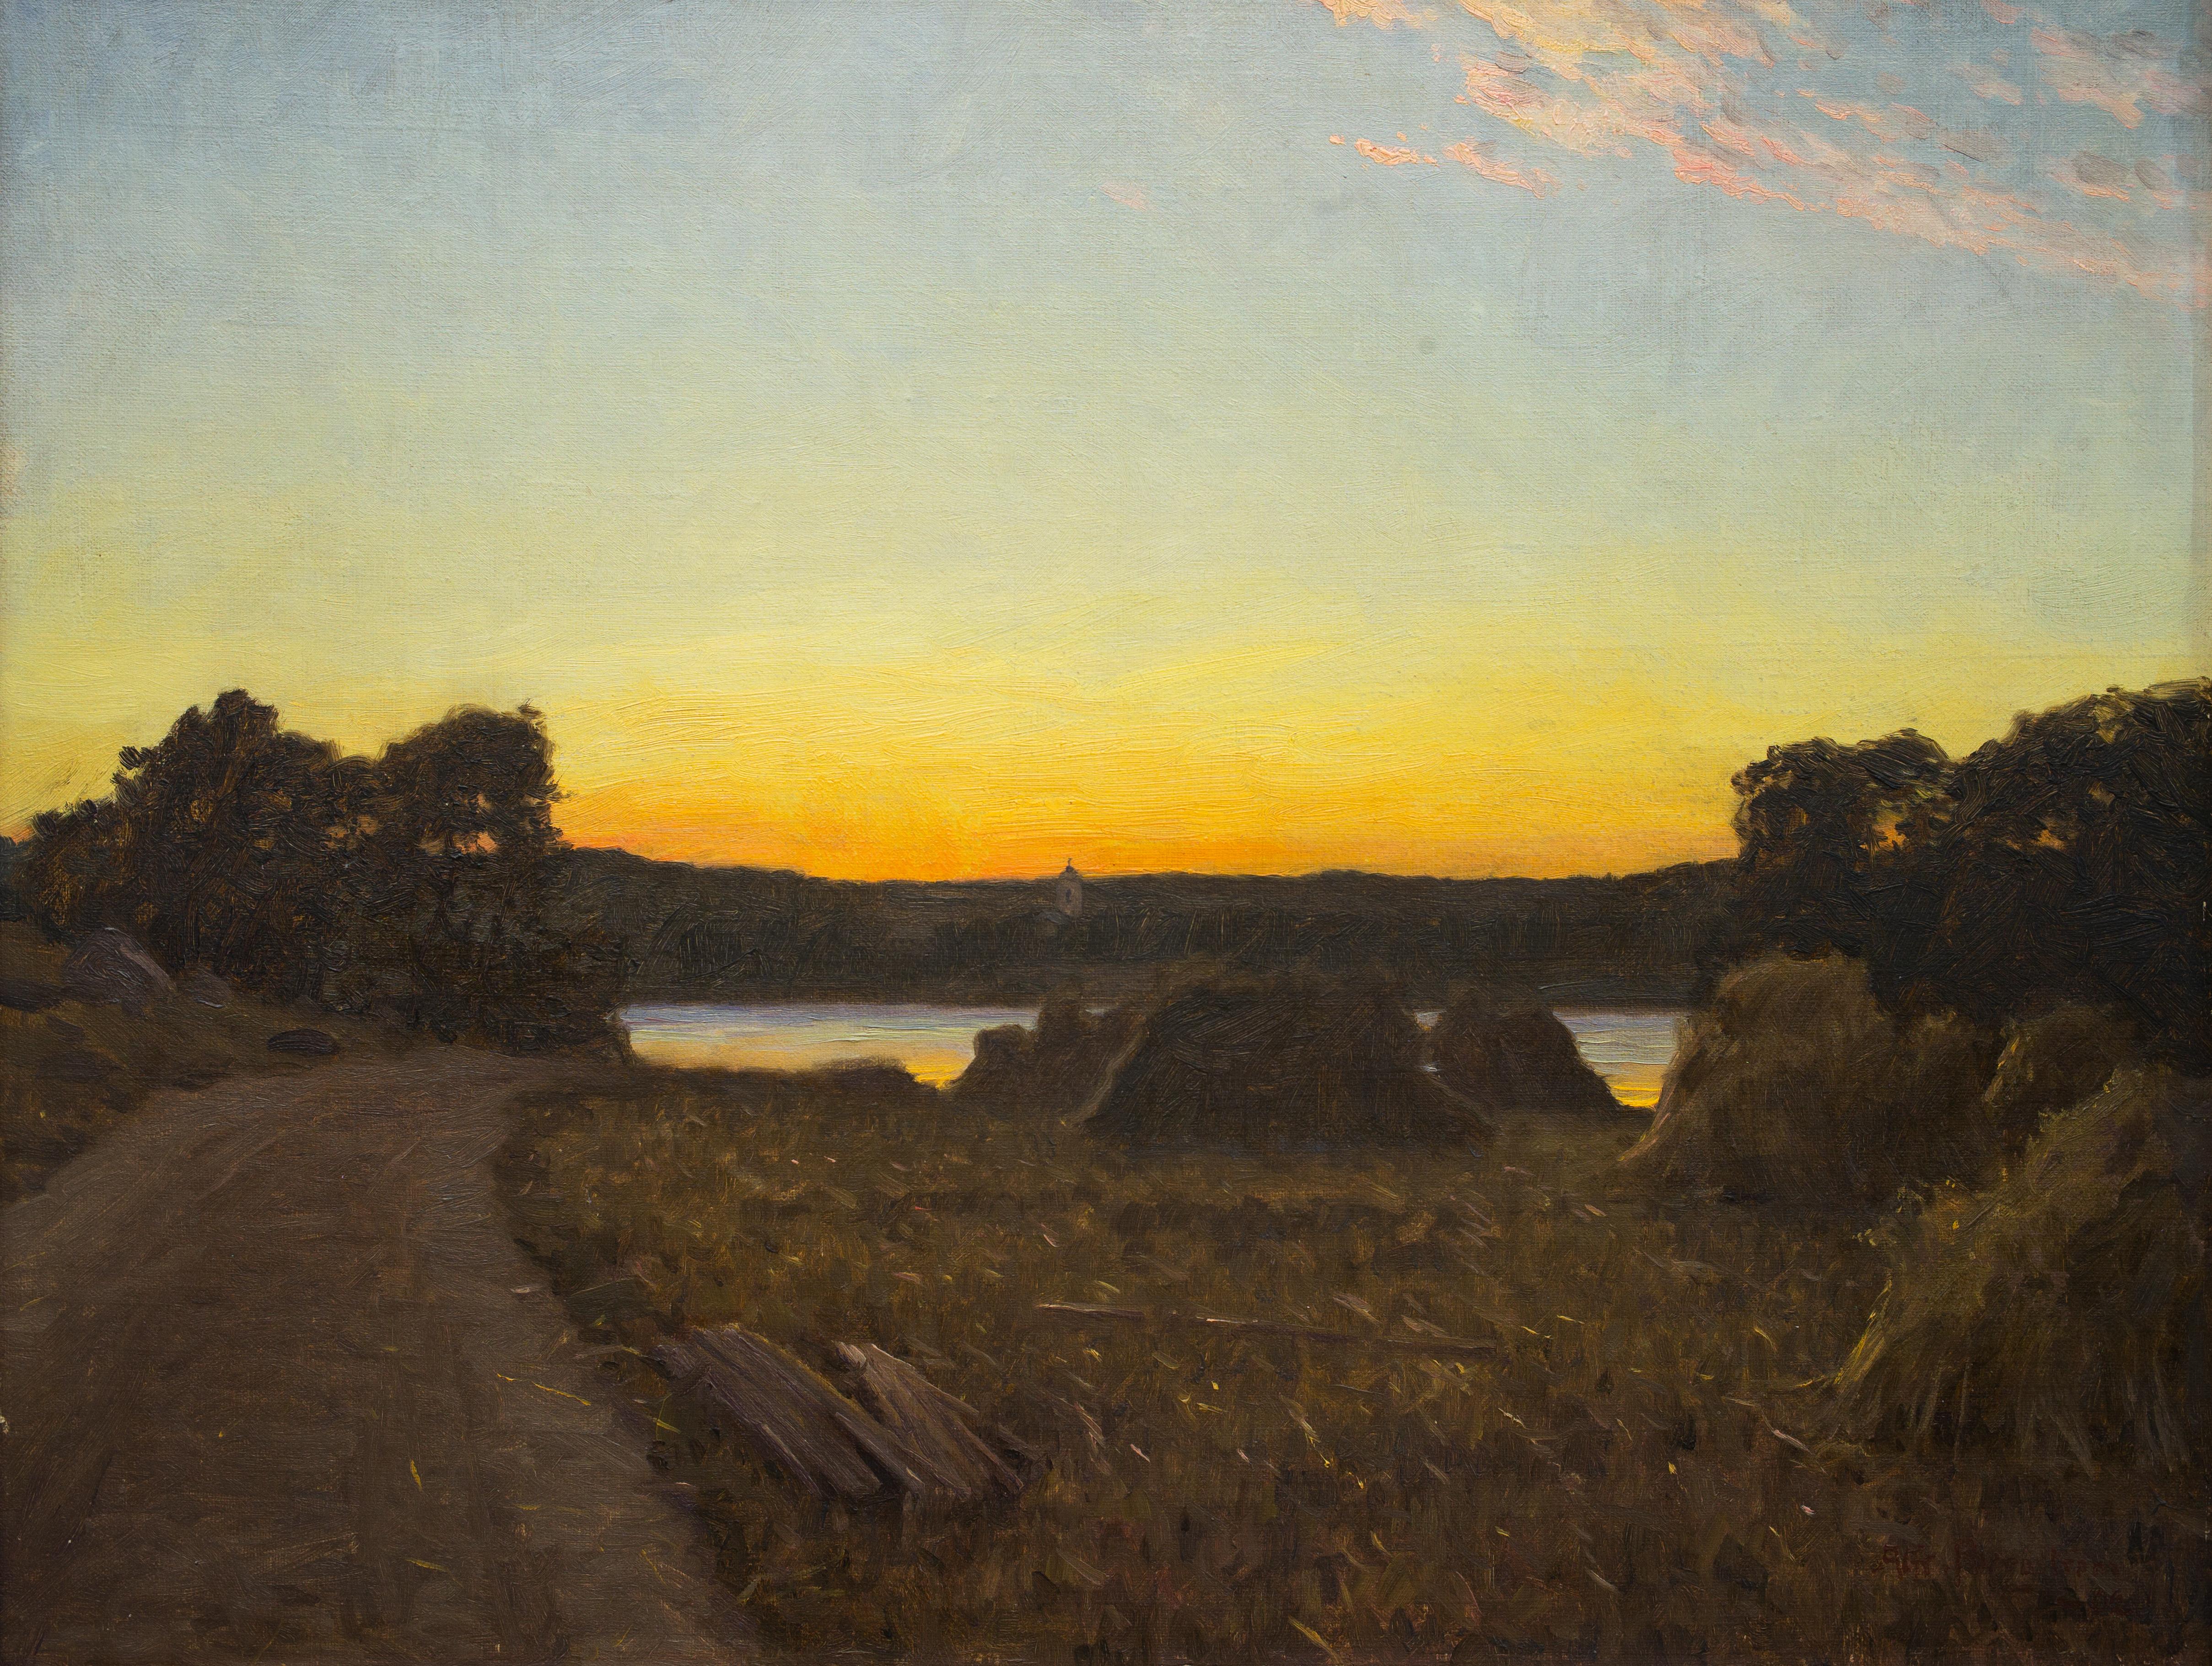 Sunrise over the Fields by Swedish Artist Alfred Bergström, 1902, Oil on Canvas